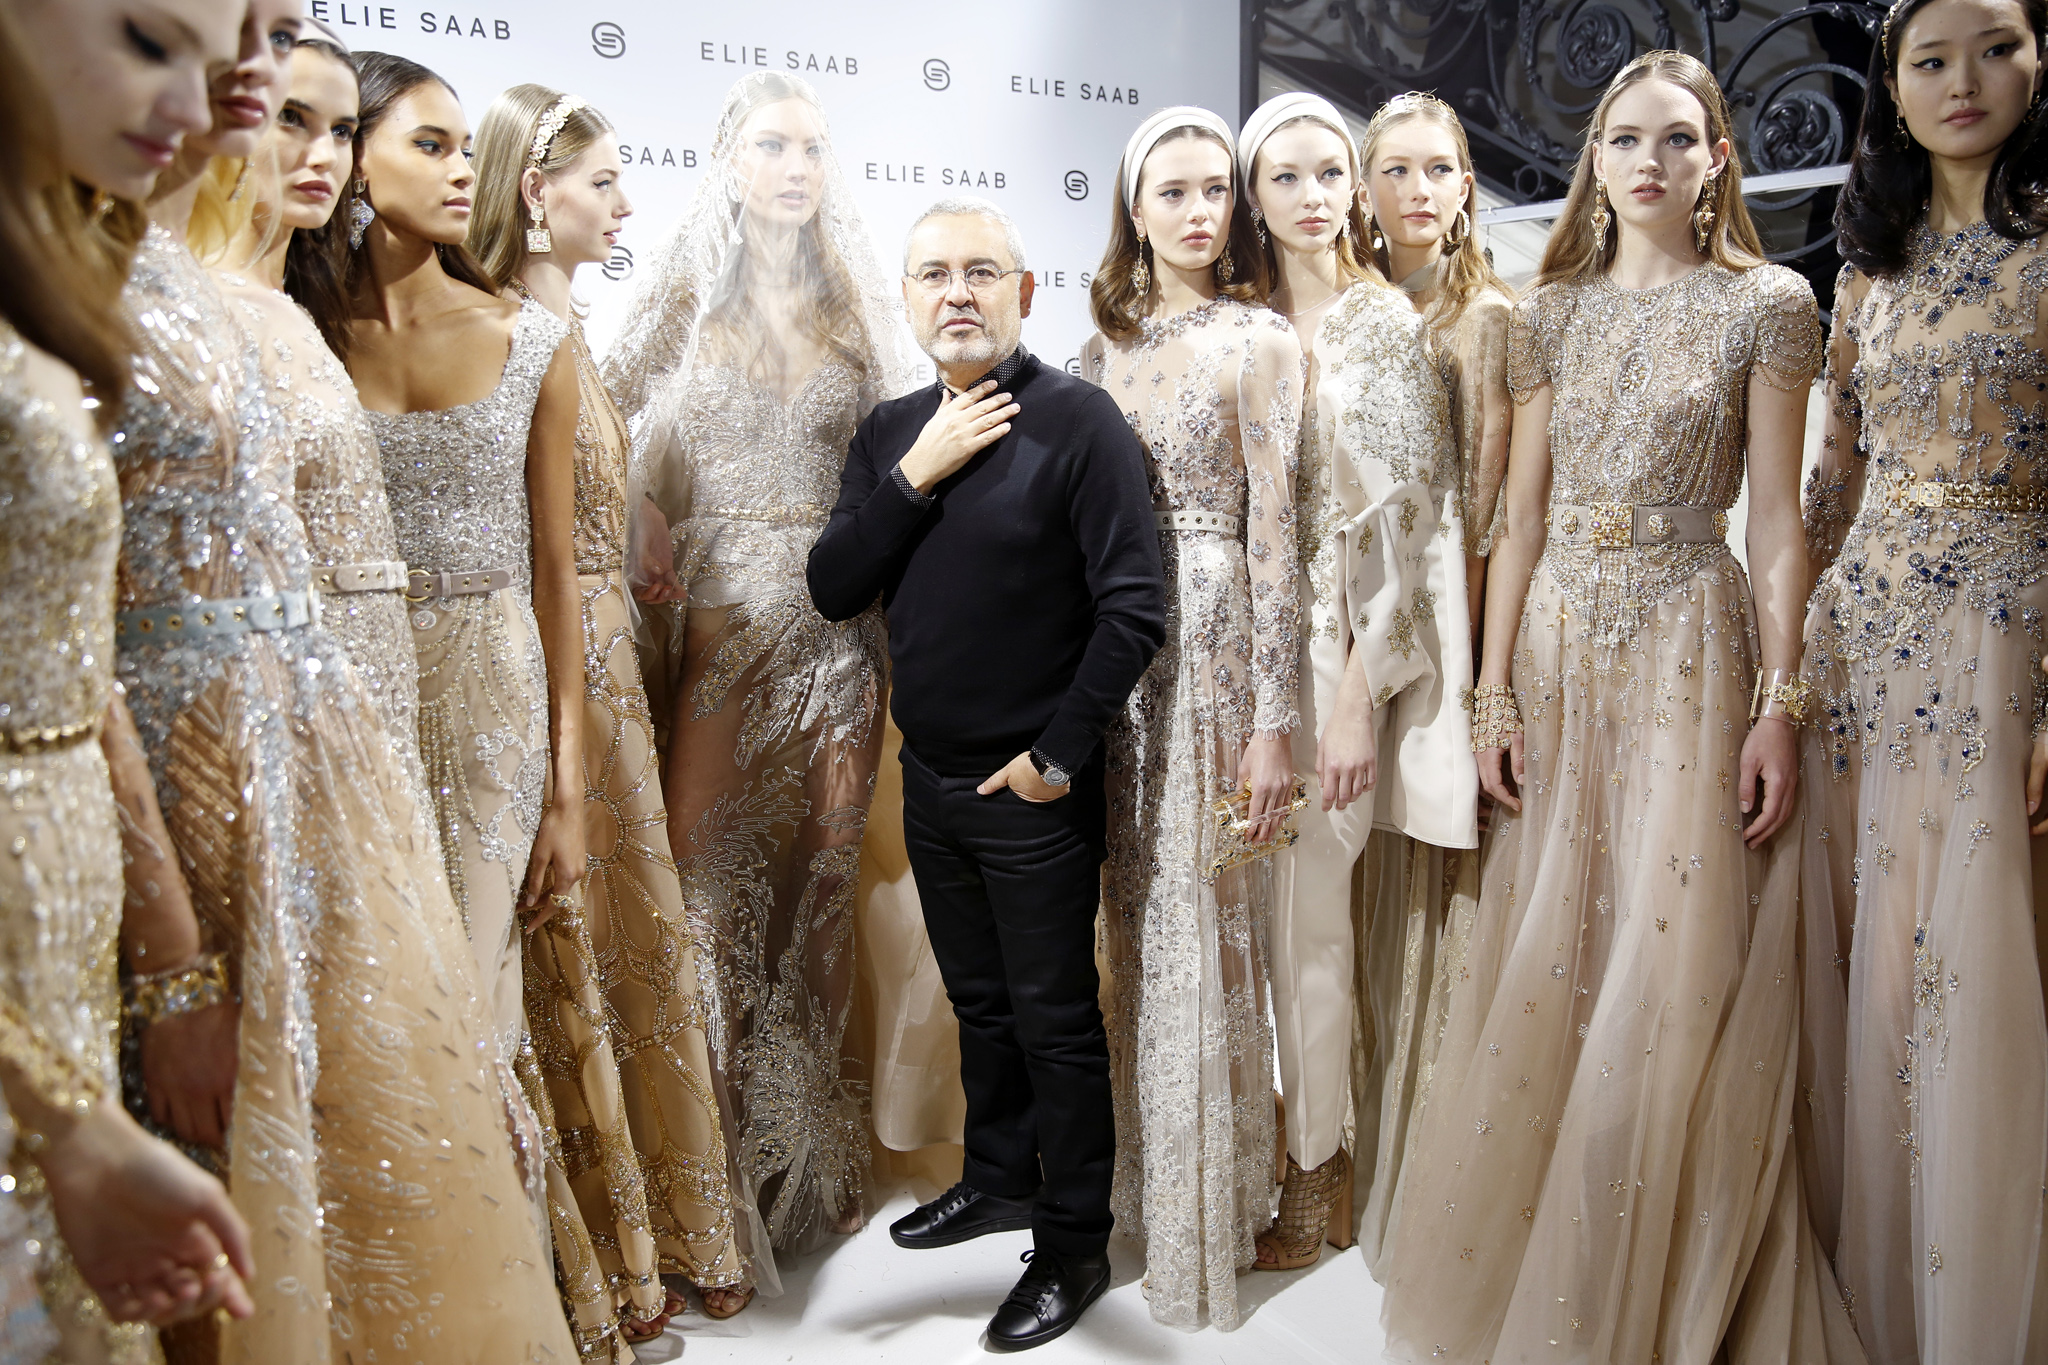 Art to wear: A look on designer Elie Saab The Chic Icon